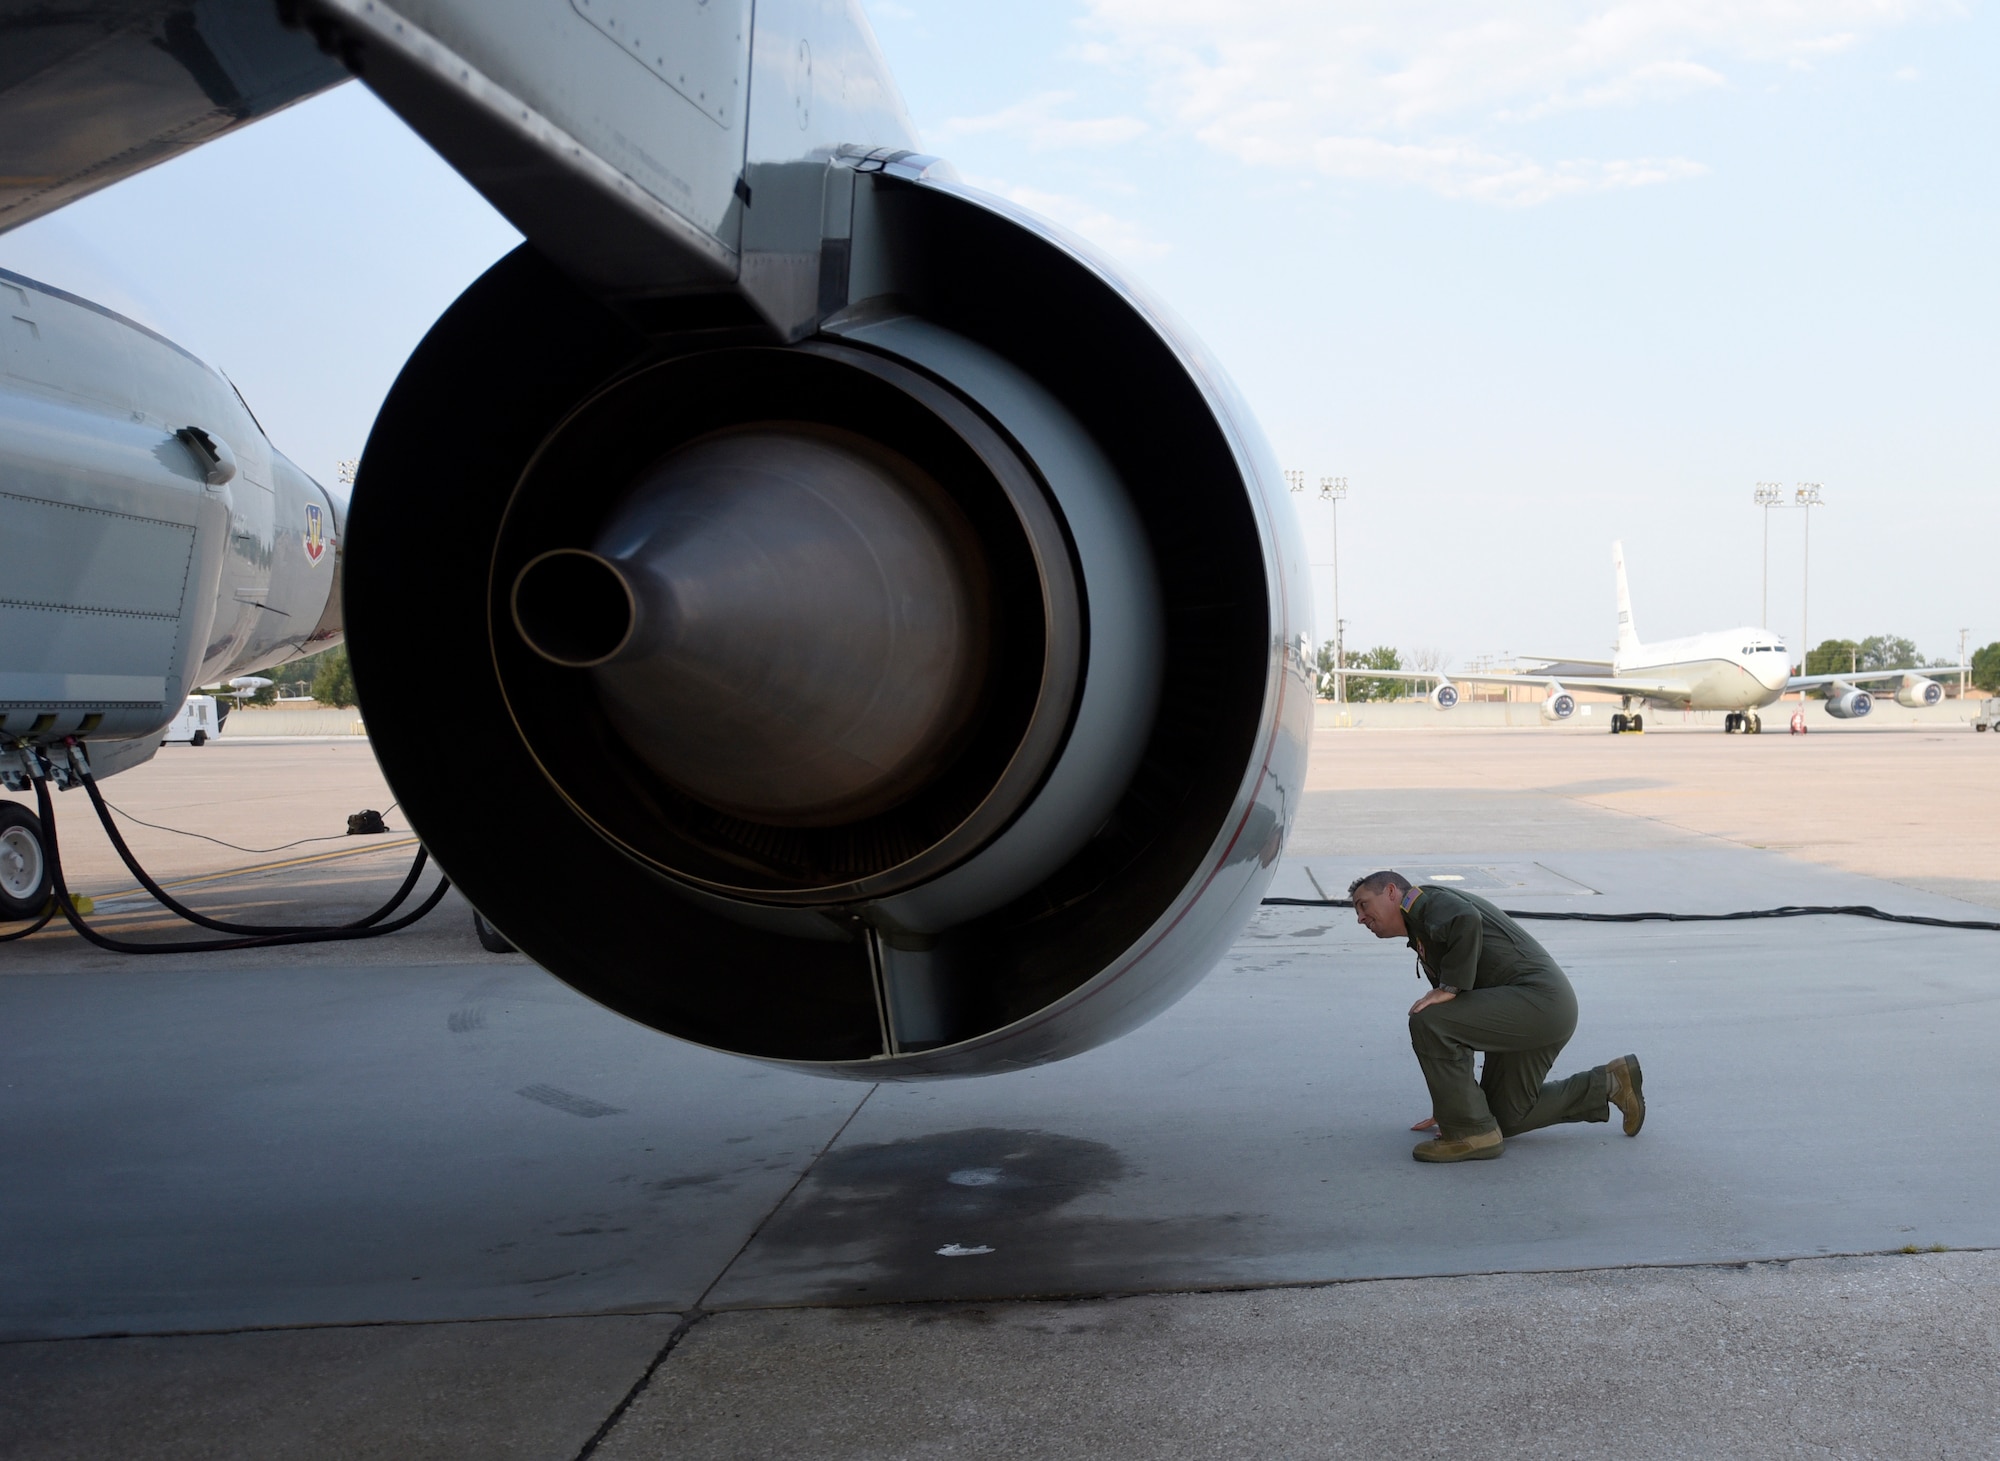 Nebraska National Guard Lt. Col. Mike Holdcroft, 170th Operational Support Squadron commander, conducts a preflight inspection on one of the  RC-135V/W Rivet Joint's four CFM International F108-CF-201 high-bypass turbofan engines Aug. 5, 2018 at Offutt Air Force Base, Nebraska. Holdcroft was the aircraft commander of a unique training sortie with a flight and mission-crew comprised almost exclusively of reserve component Airmen. The aircraft is an extensively modified C-135. The Rivet Joint's modifications are primarily related to its on-board sensor suite, which allows the mission crew to detect, identify and geolocate signals throughout the electromagnetic spectrum. The mission crew can then forward gathered information in a variety of formats to a wide range of consumers via Rivet Joint's extensive communications suite. (U.S. Air Force photo by 2nd Lt. Drew Nystrom)